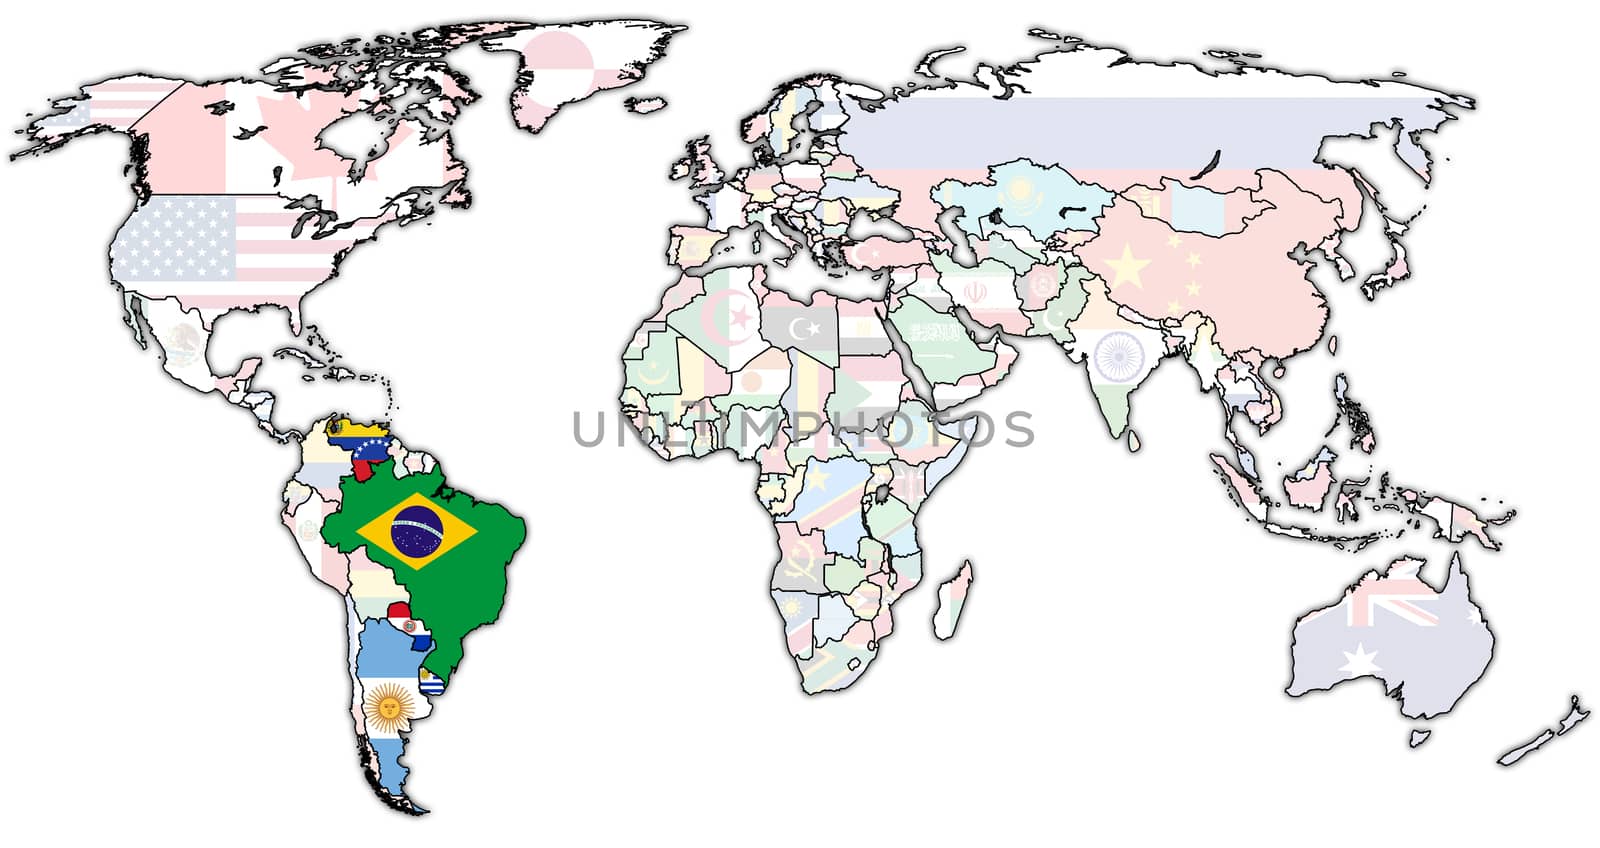 Southern Common Market on world map with national borders